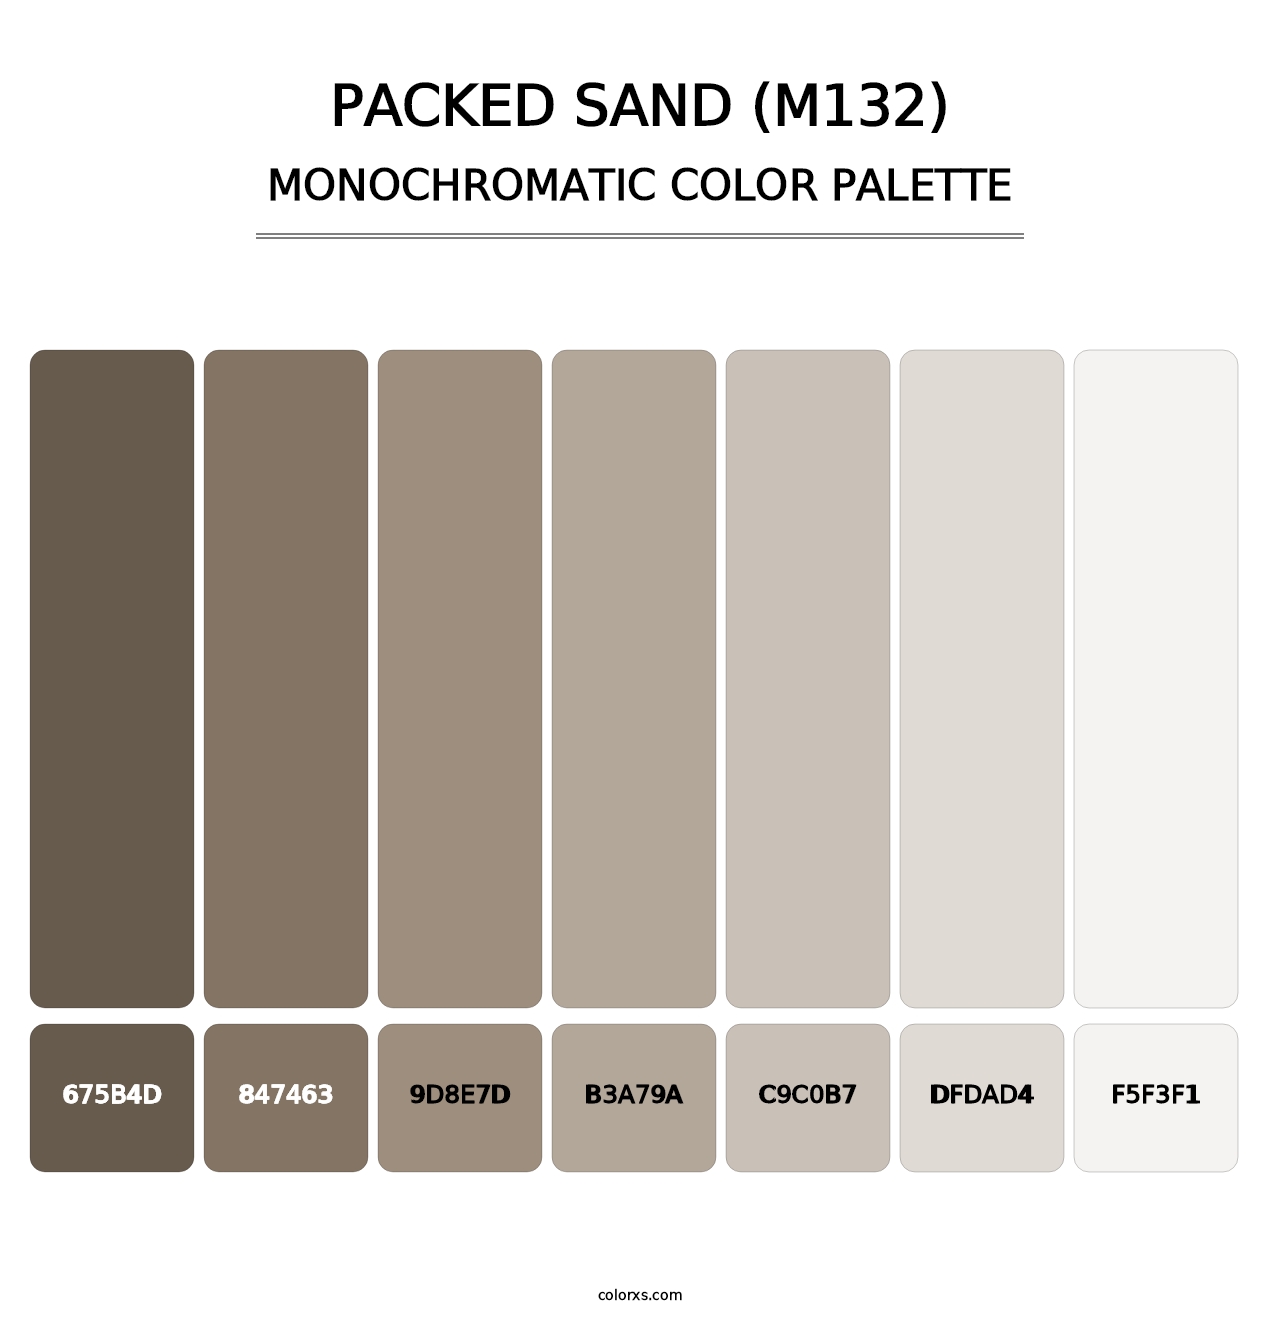 Packed Sand (M132) - Monochromatic Color Palette